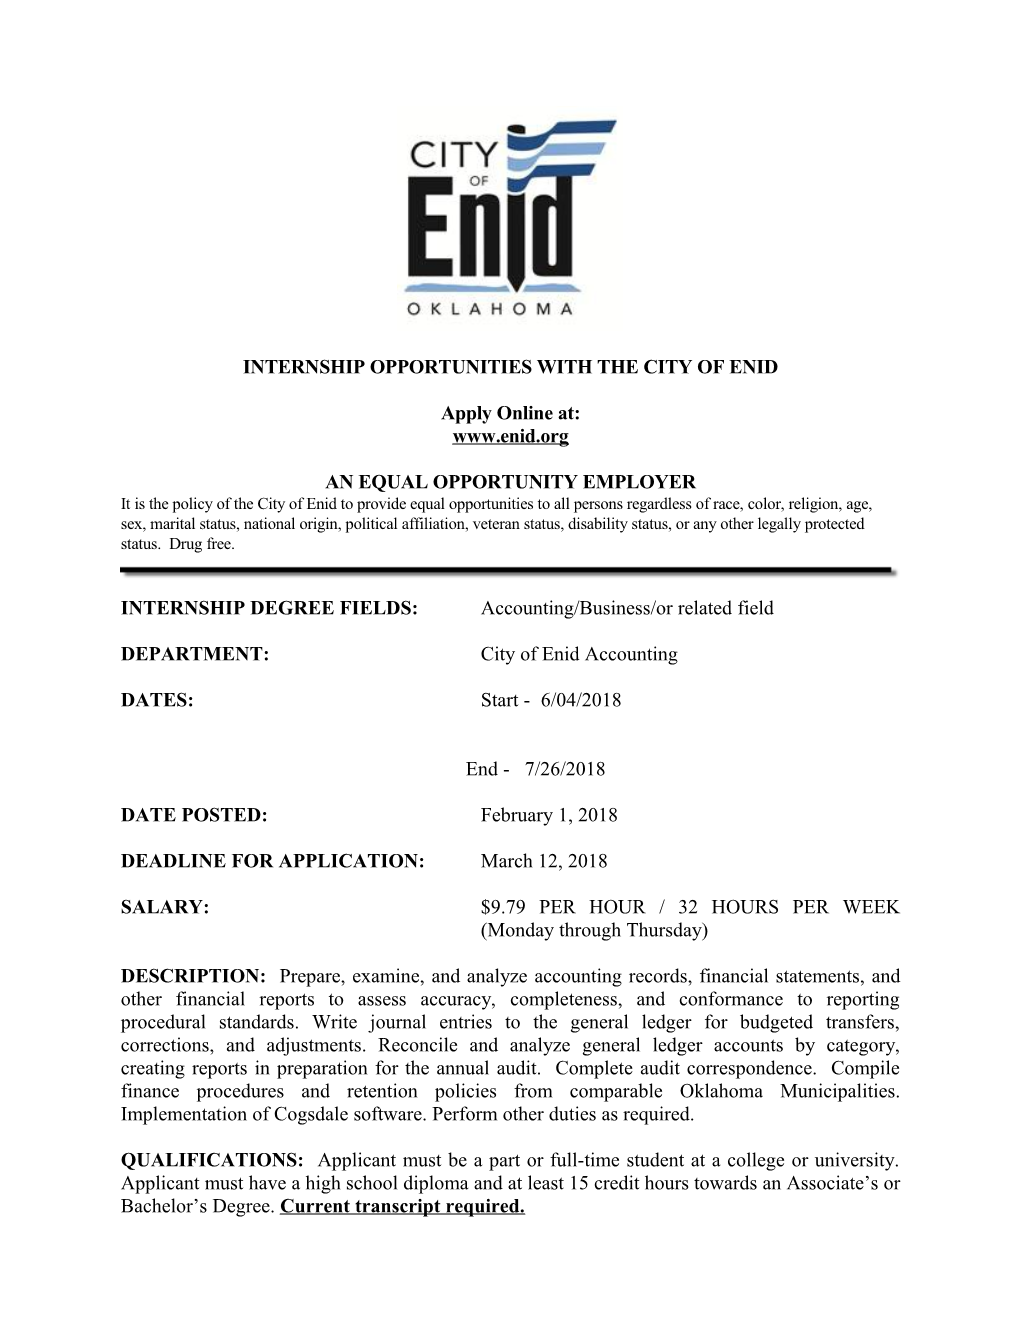 Internship Opportunities with the City of Enid